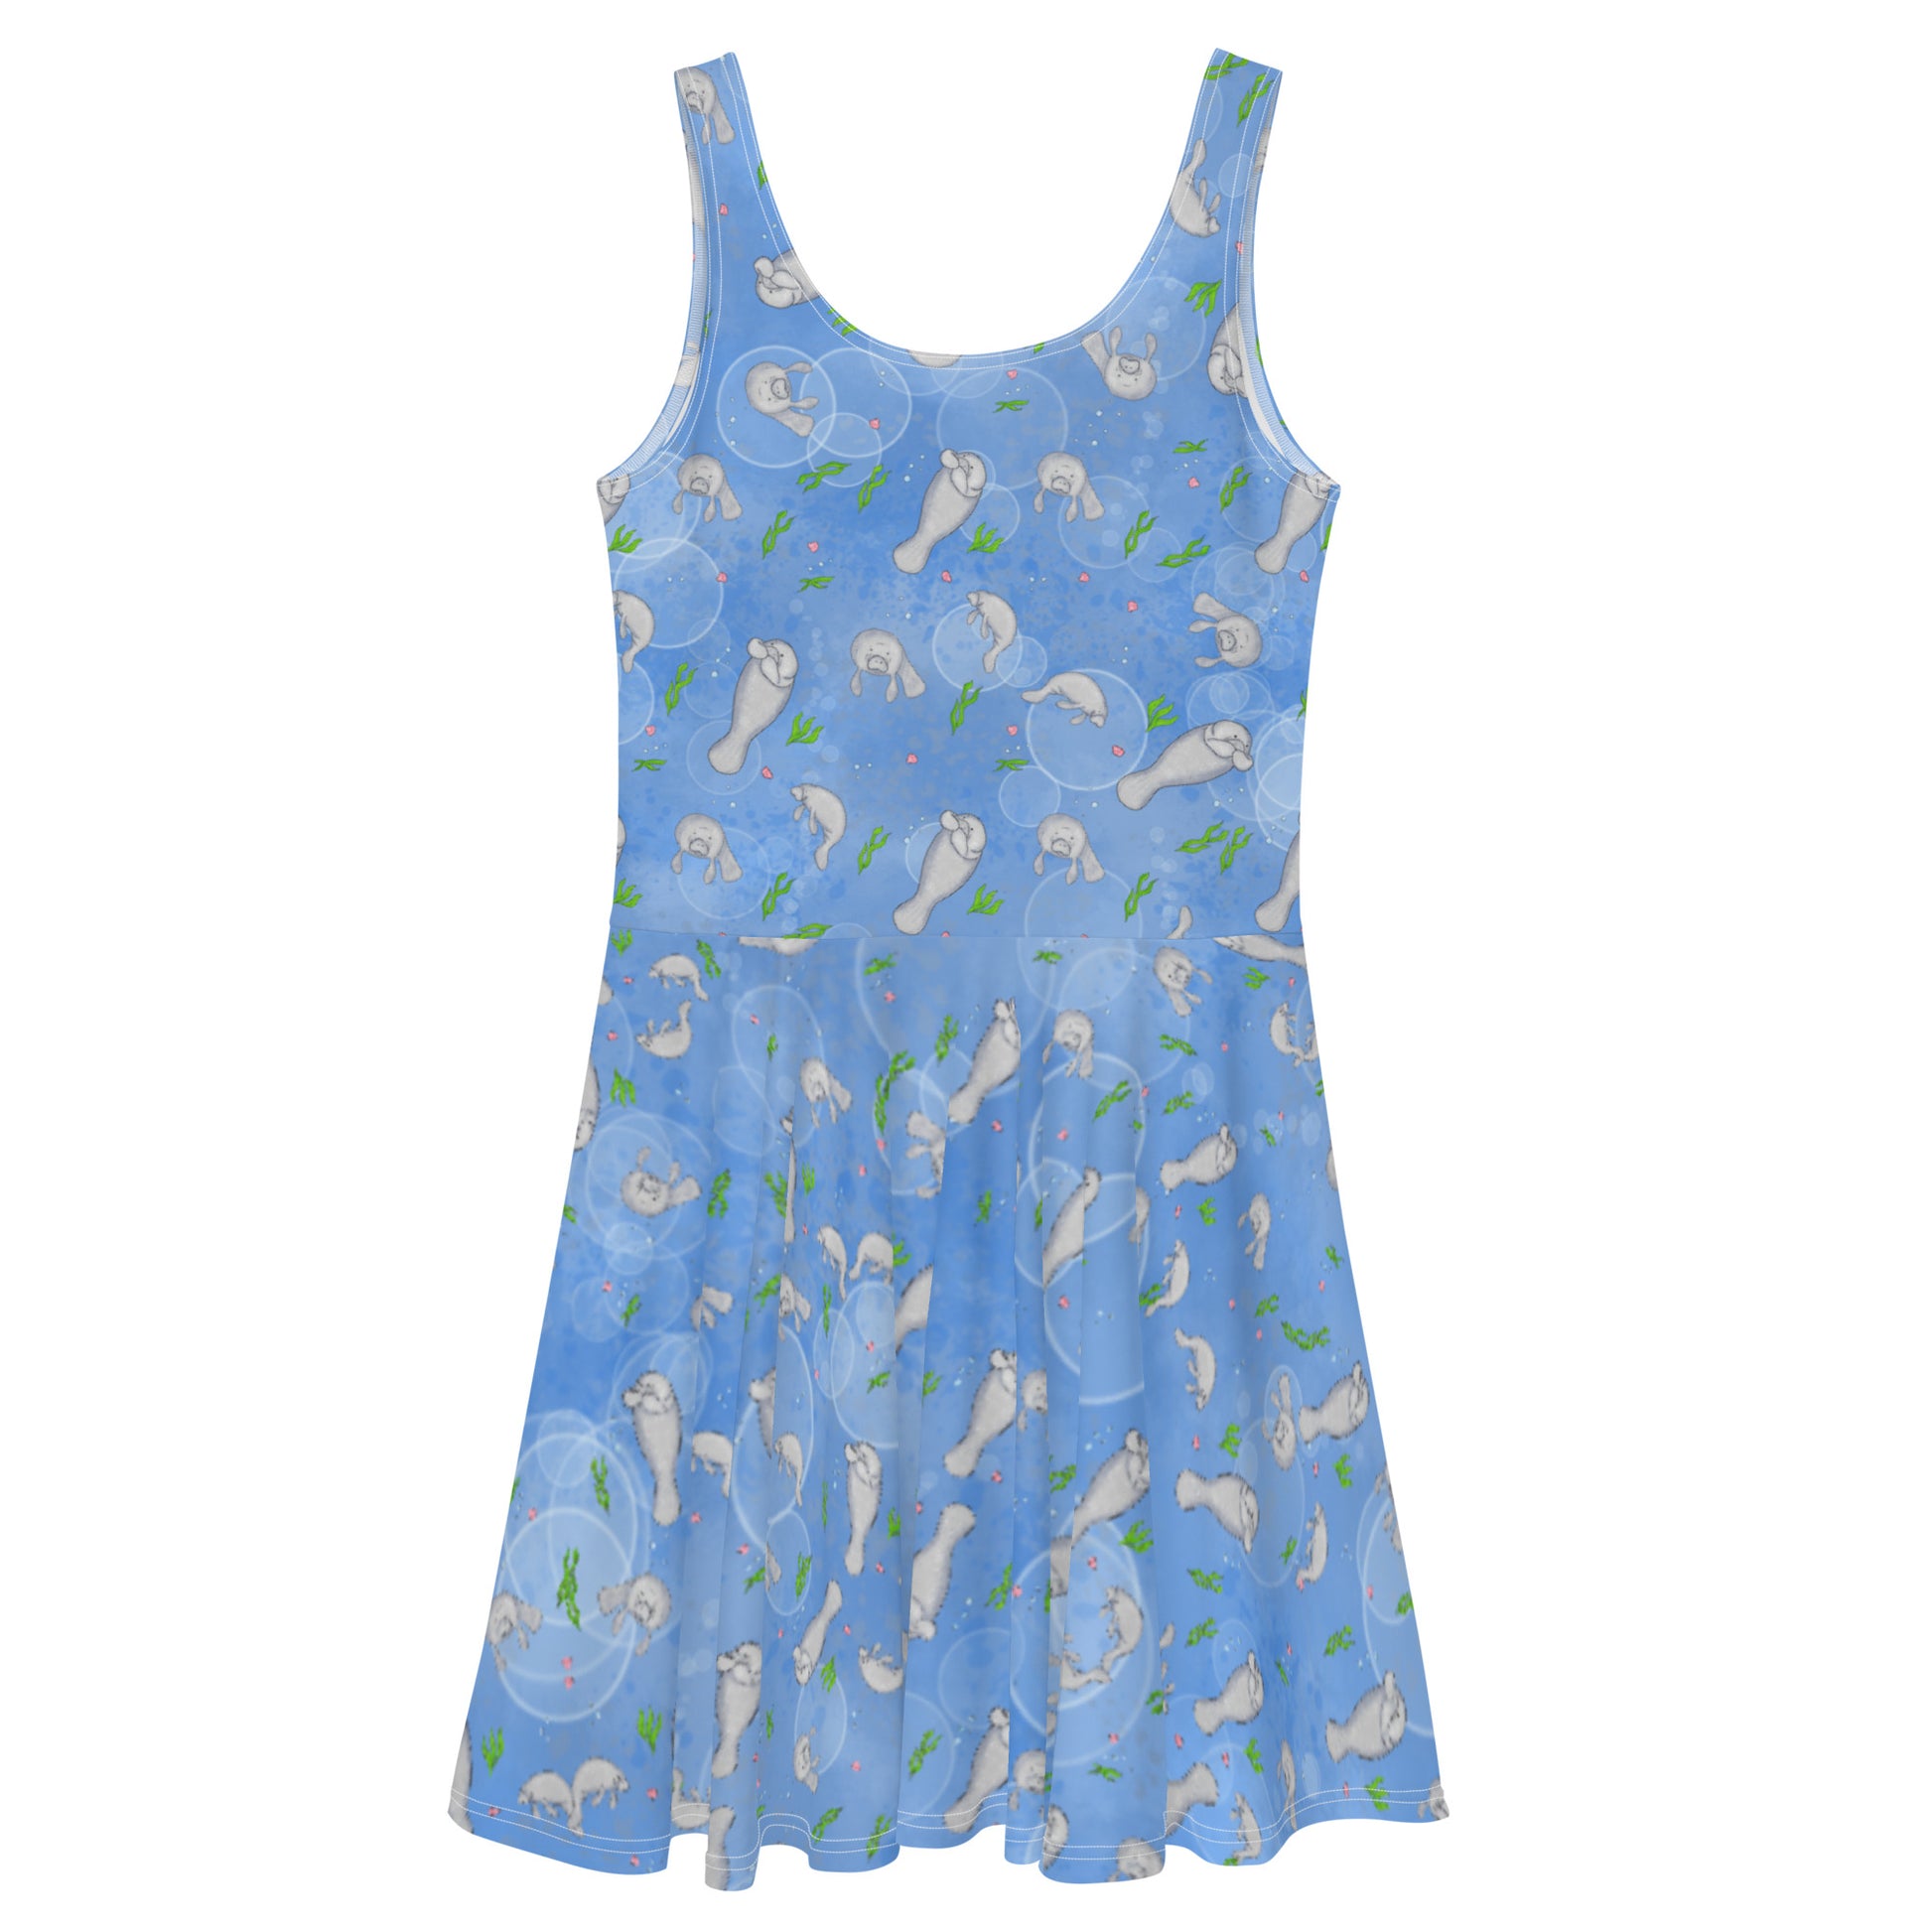 Sleeveless skater dress that features manatees on on ocean blue background. The soft fabric is made of 82% polyester and 18% spandex, so it is both smooth and stretchy. It has a mid-thigh length flared skirt and elastic waistline. Back view of dress.